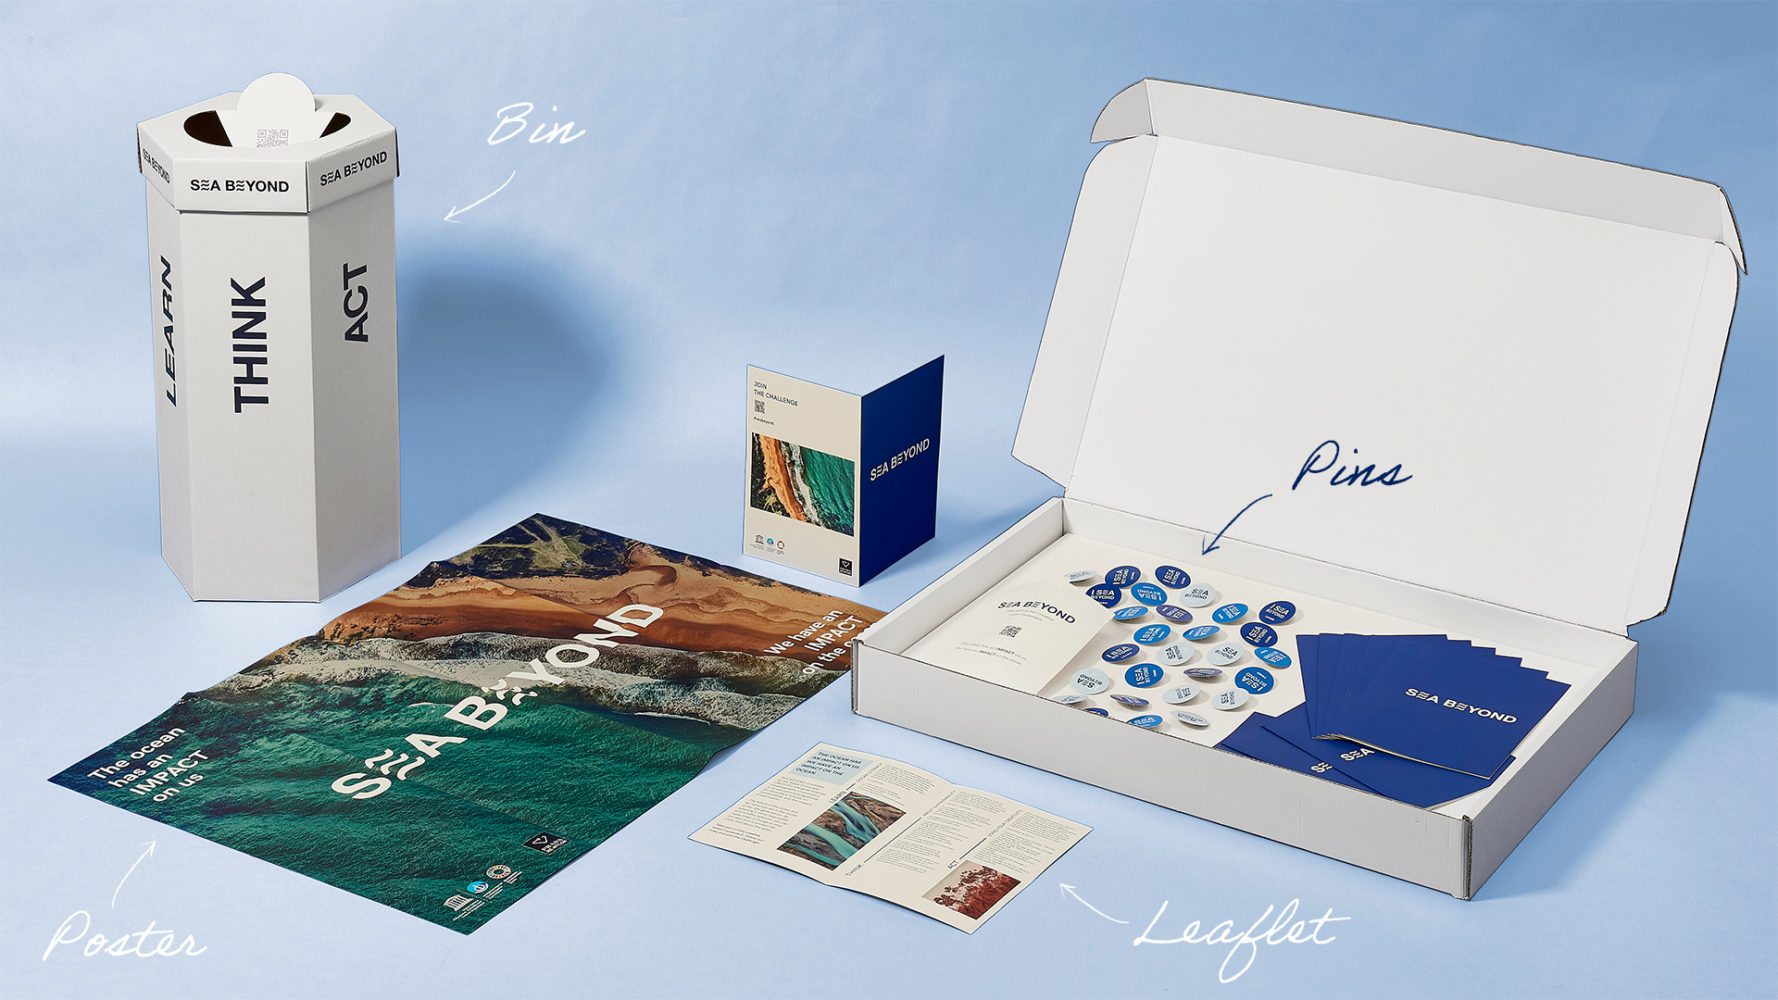 Sea Beyond project toolkit, courtesy of Prada and UNESCO.